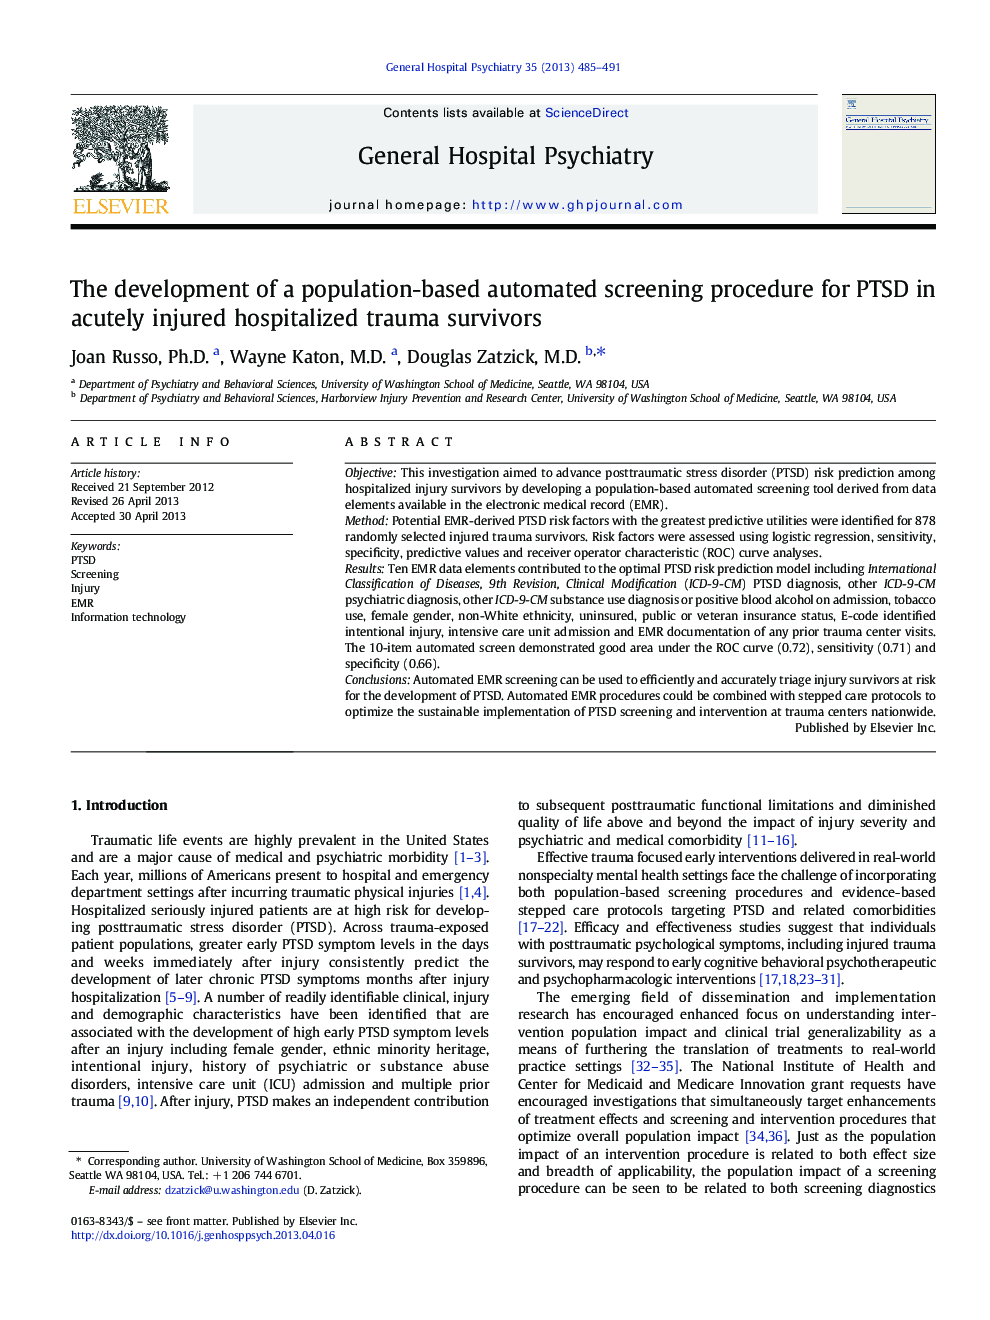 Psychiatric-Medical ComorbidityThe development of a population-based automated screening procedure for PTSD in acutely injured hospitalized trauma survivors